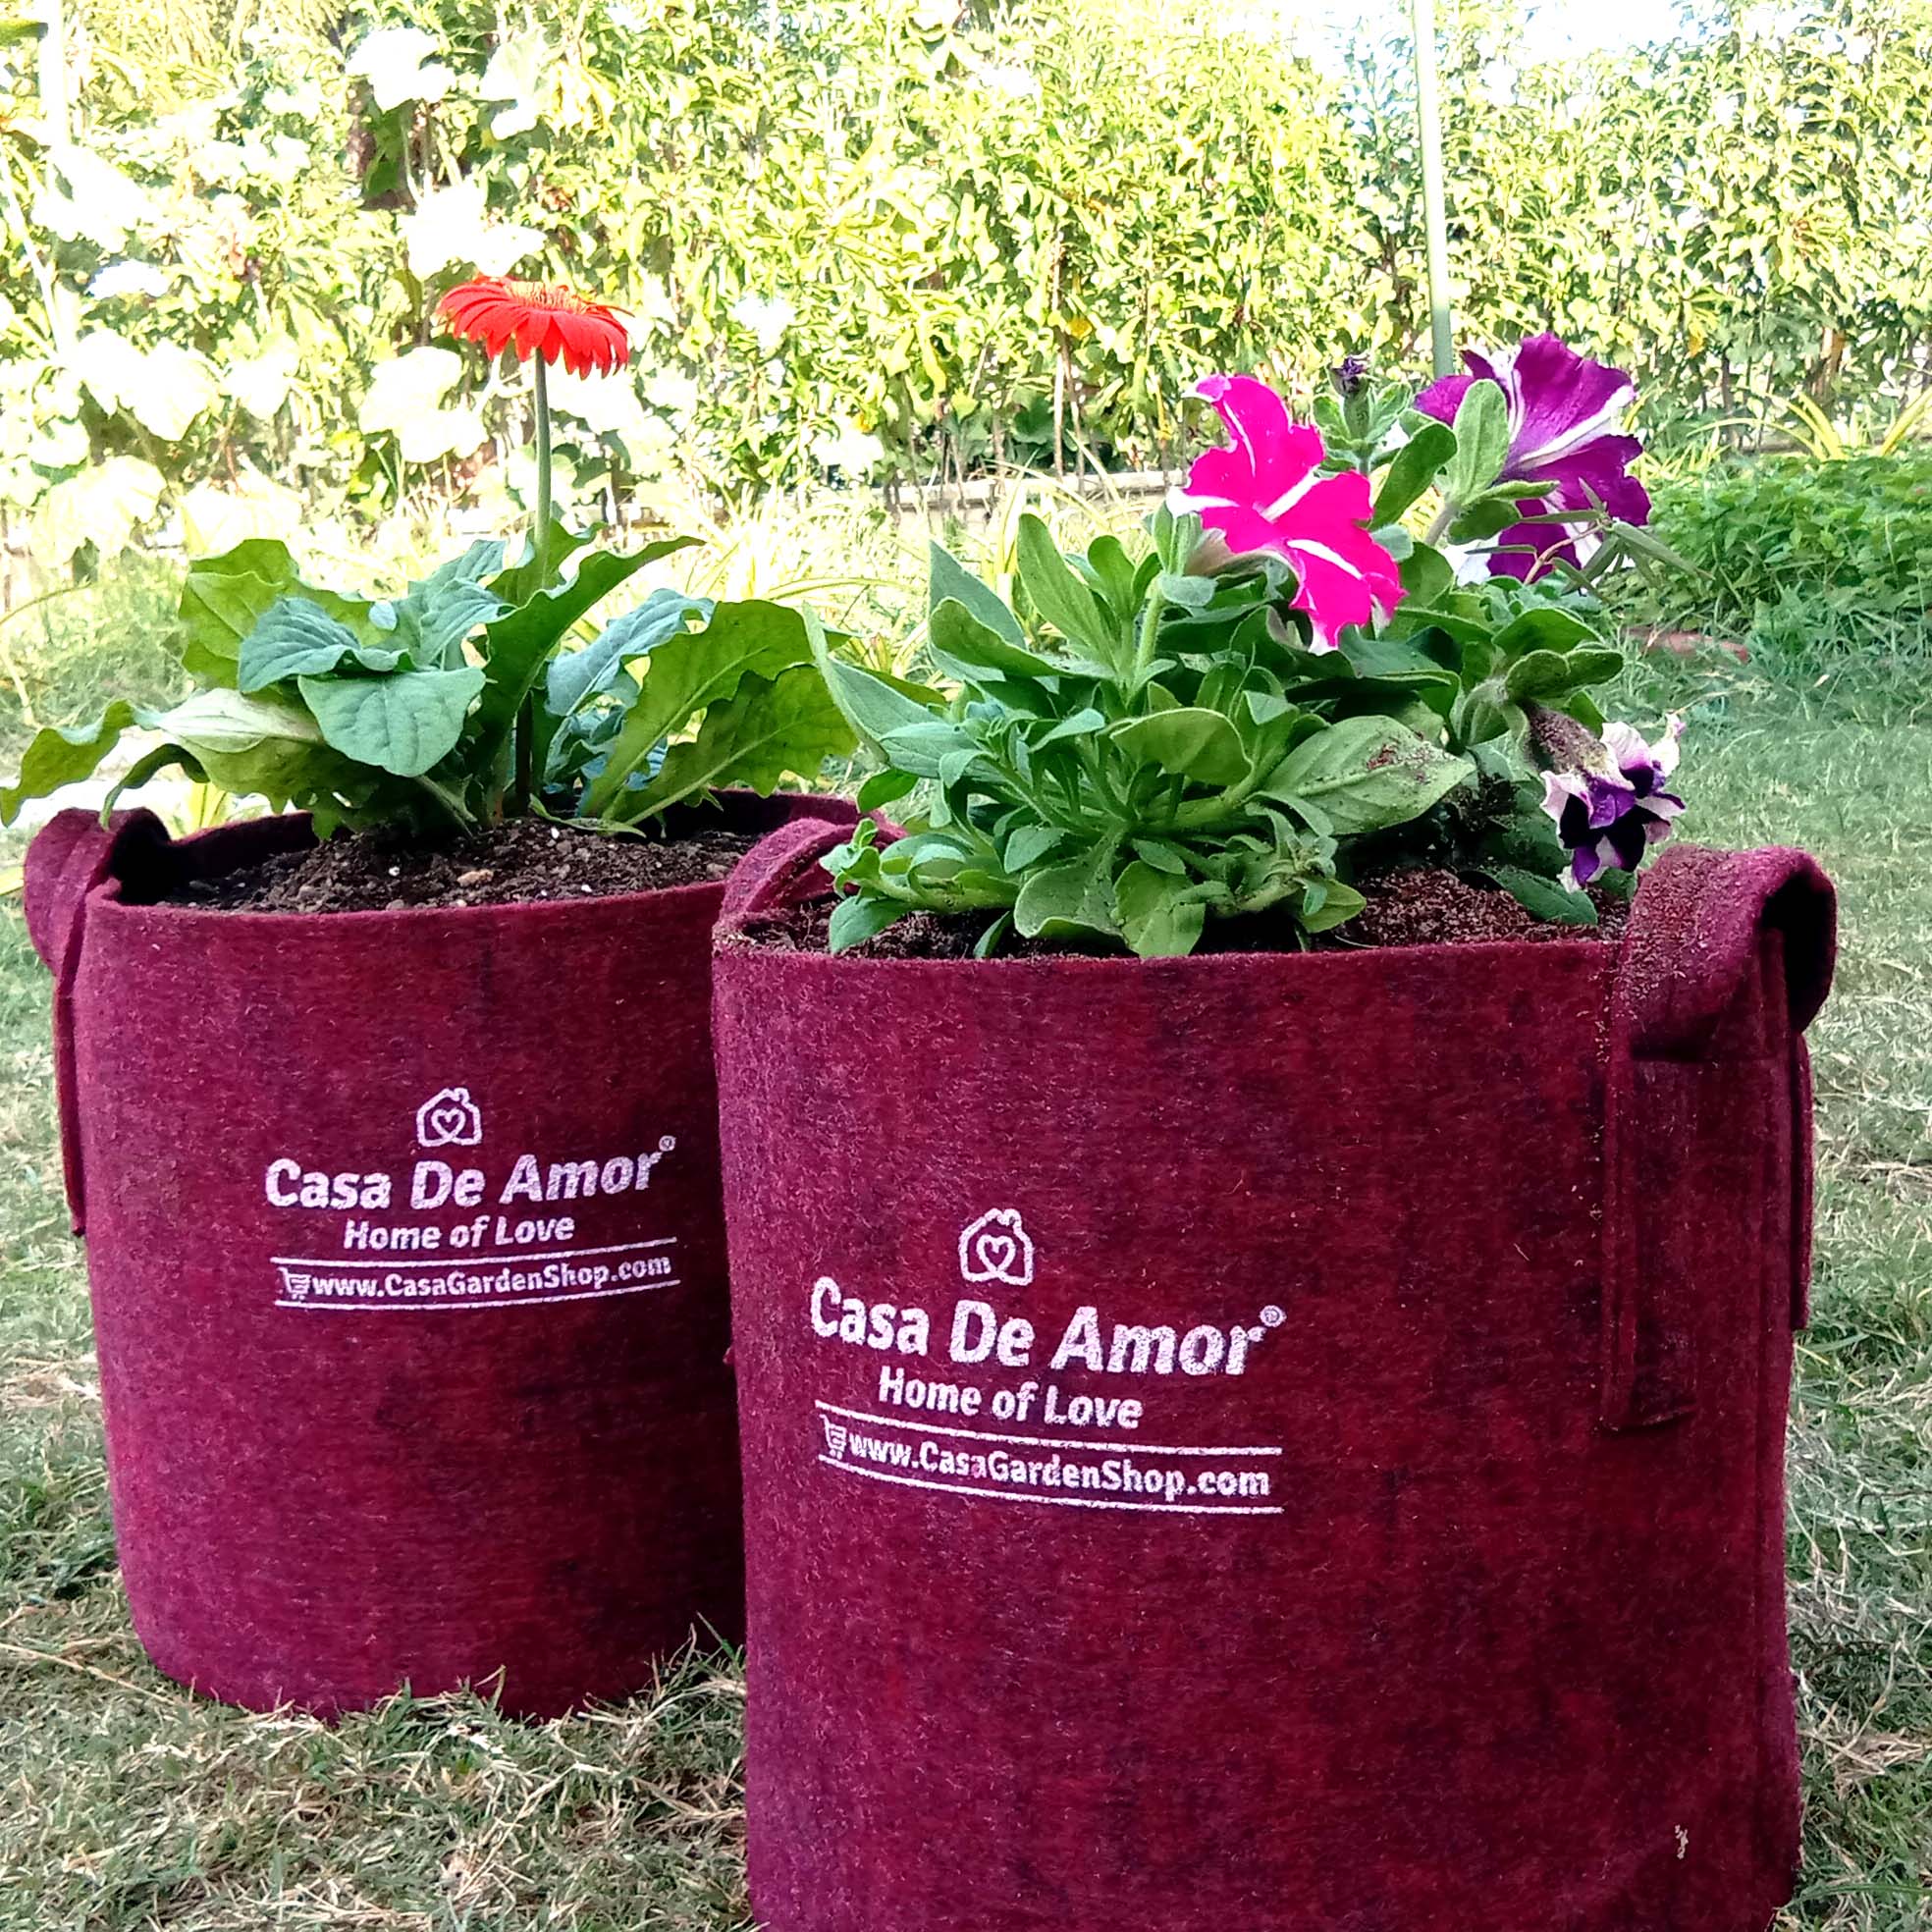 1500 litre Woven Planter Bags - heavy duty strapping and handles